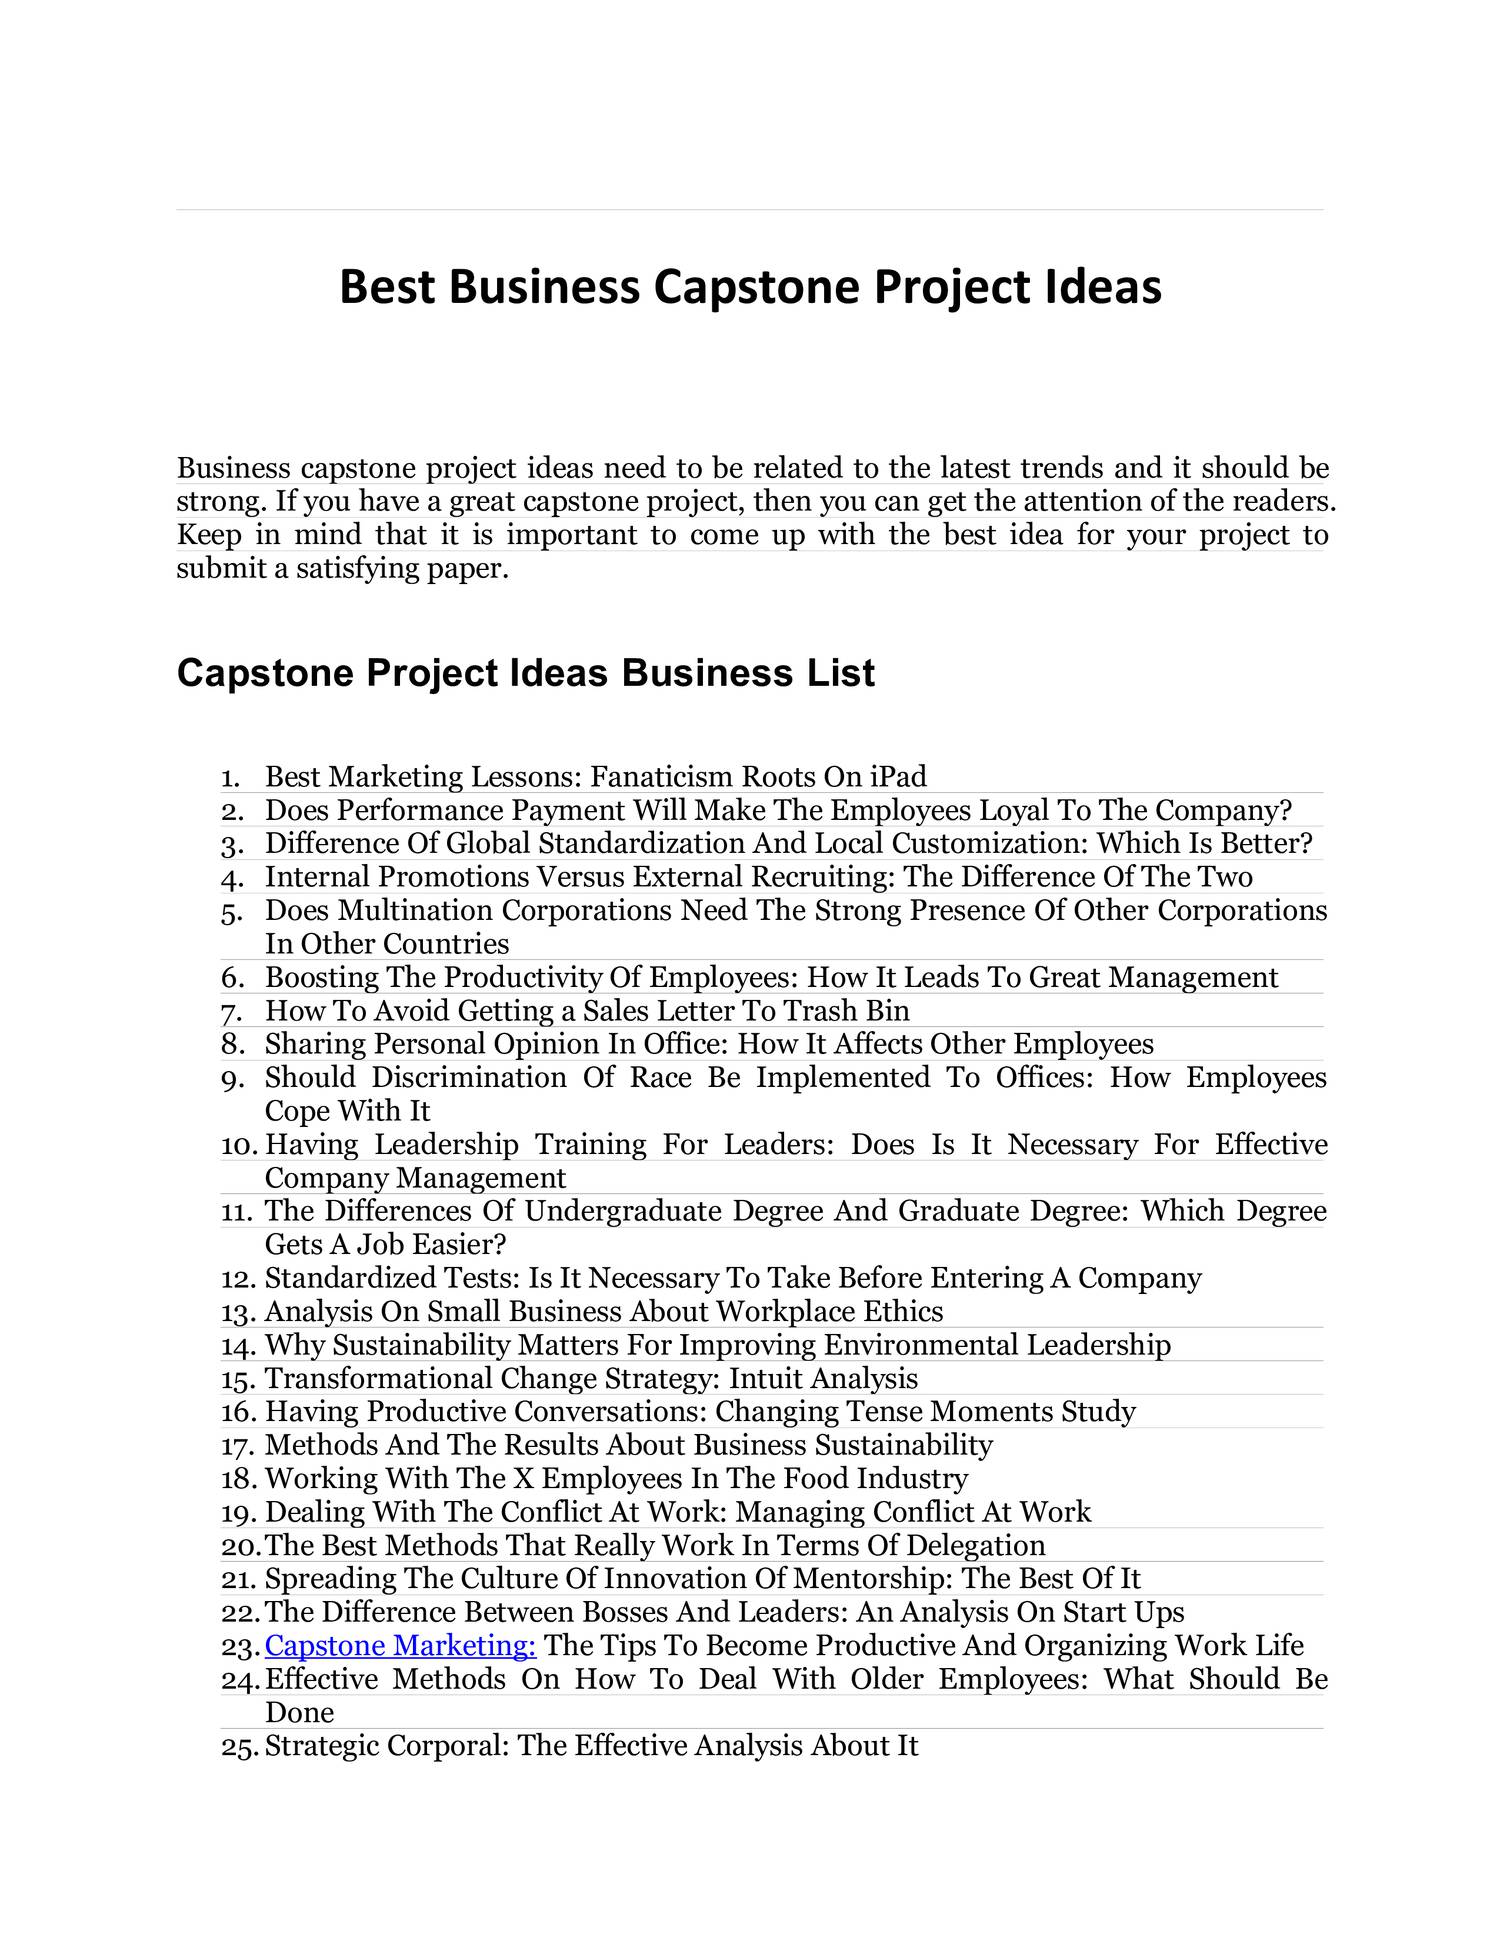 how to write a capstone project paper